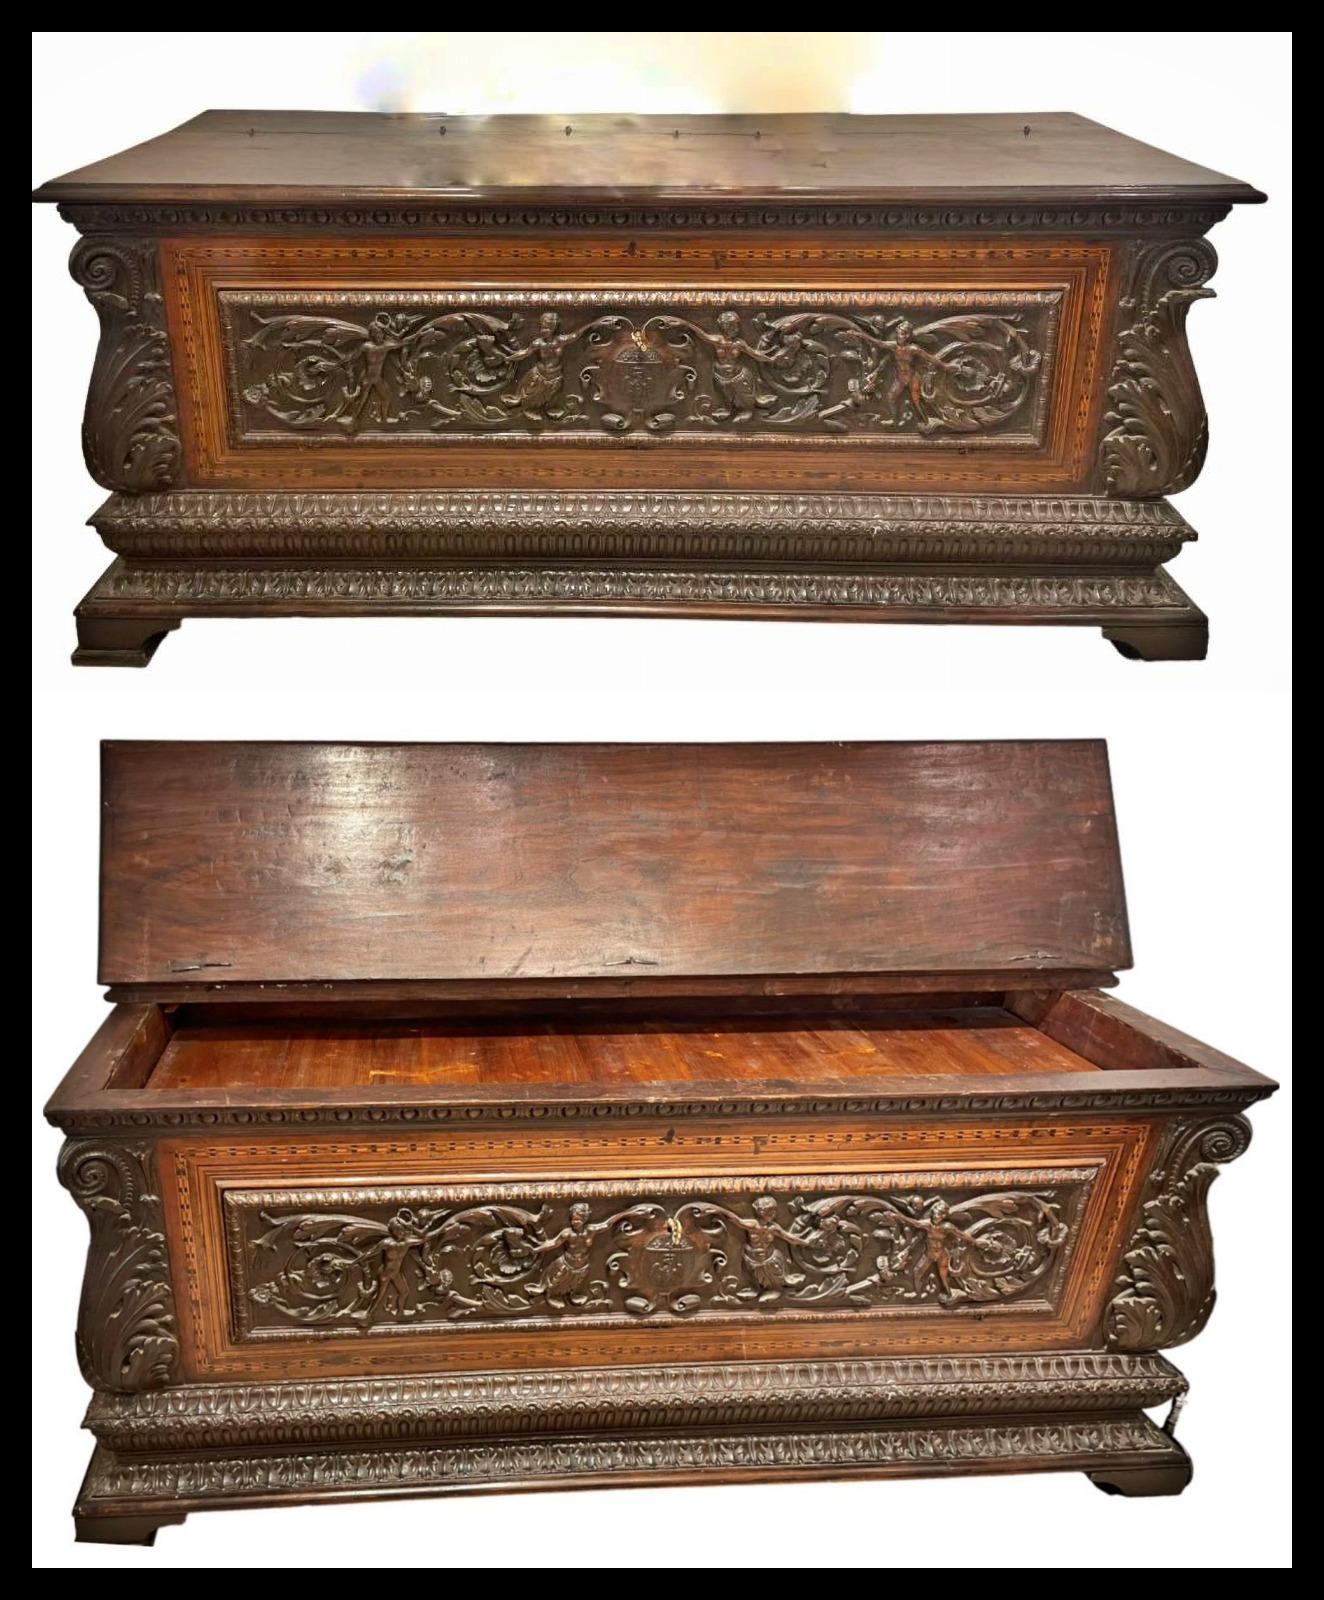 Amazing Chest, Italy, late 16th century
93 x 214 x 74 cm
Rectangular shaped chest, in walnut wood. Four bracket feet, with four corners with sculpted leaves. Table top with owl's beak and ovule frame, frontal framing with relief scene of cherubs and